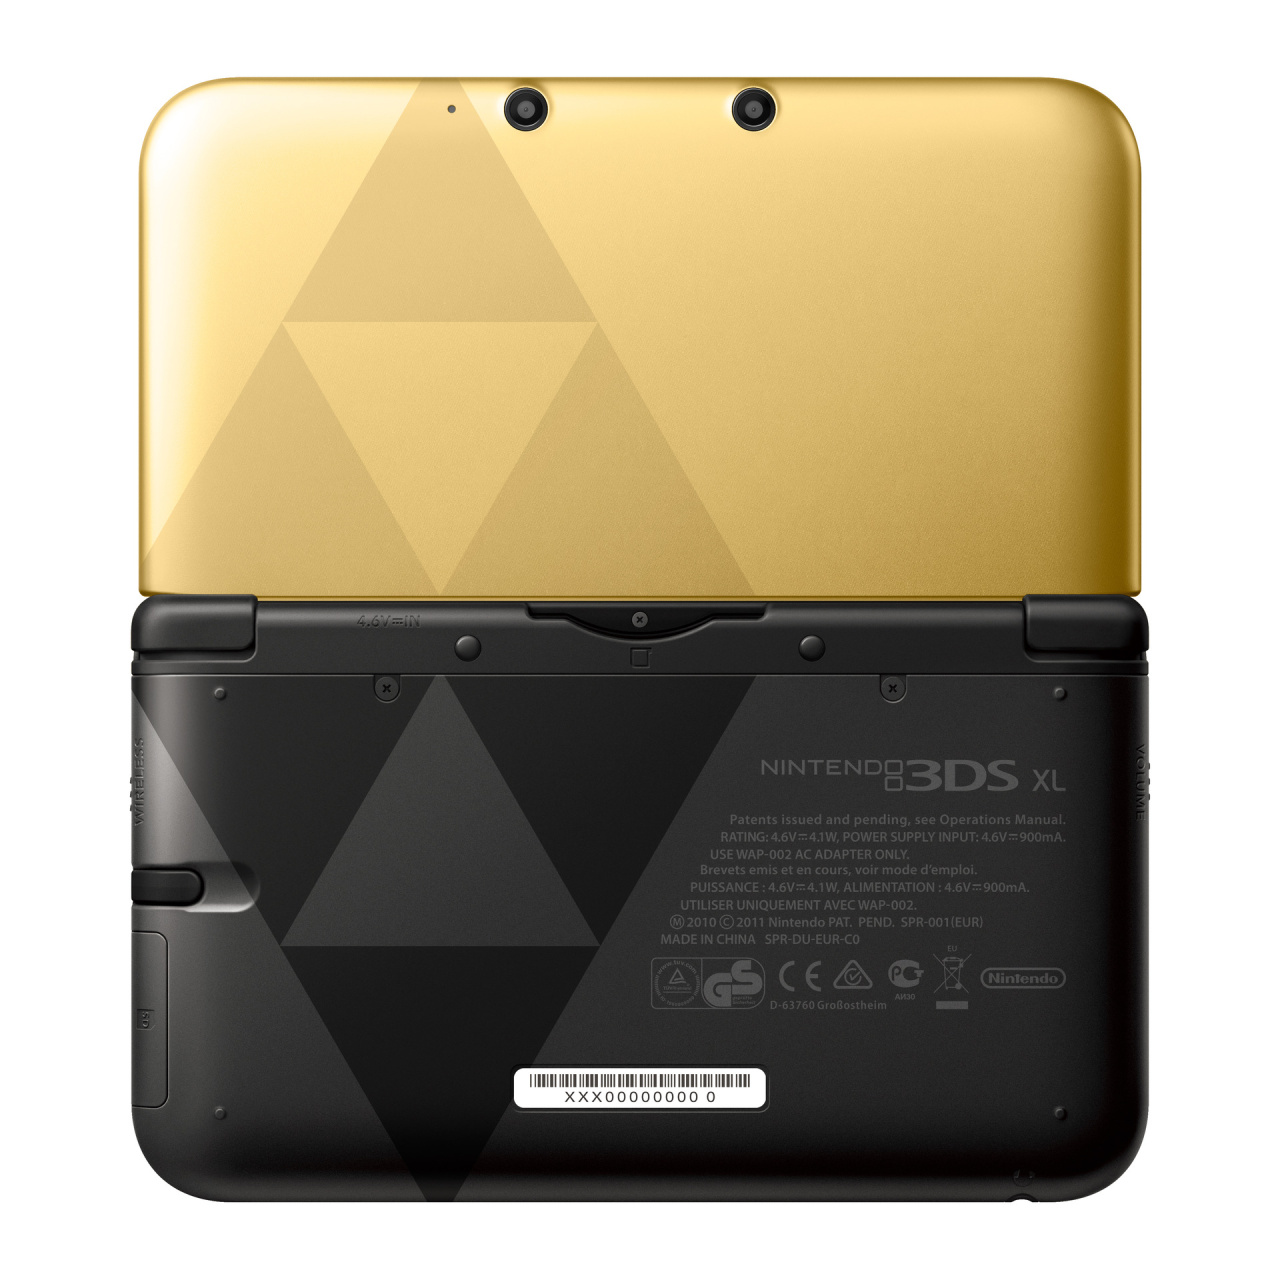 A Link Between Worlds arrive in the EU with a reversible cover : r/3DS